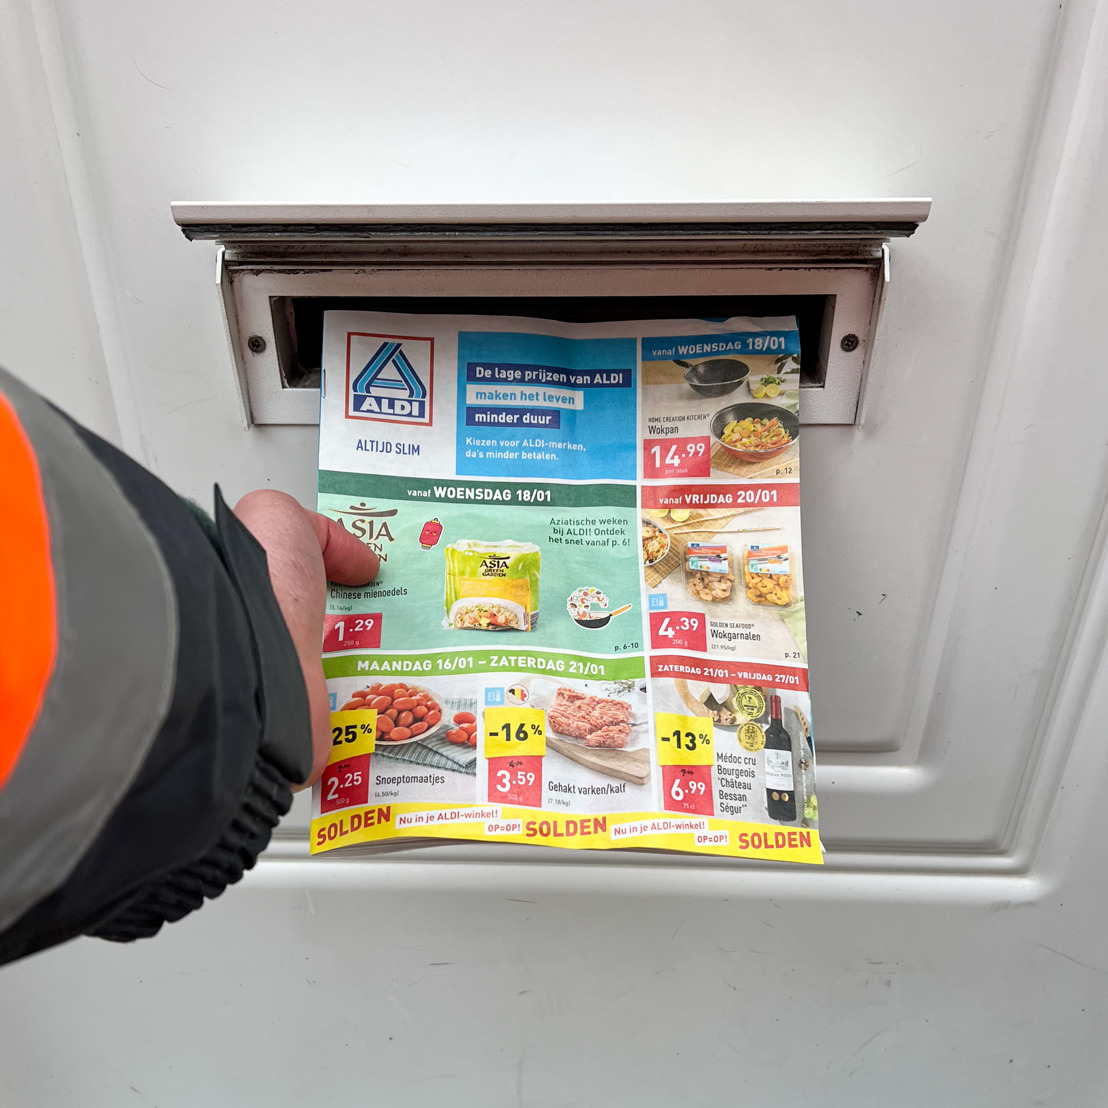 ALDI renews its trust in bpost for the delivery of its leaflet